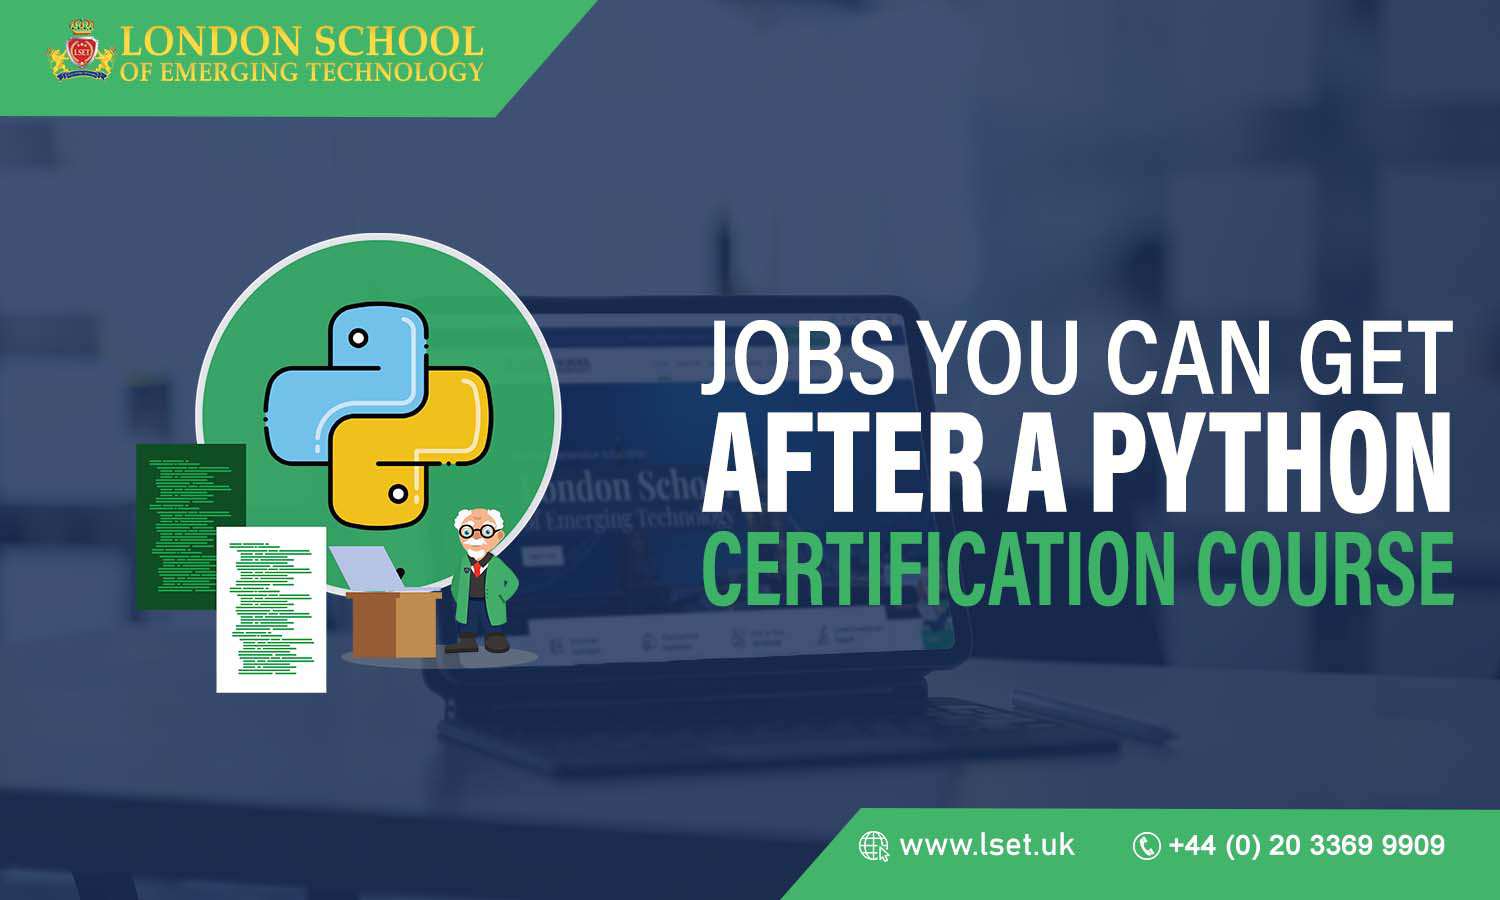 Jobs You Can Get After a Python Certification Course